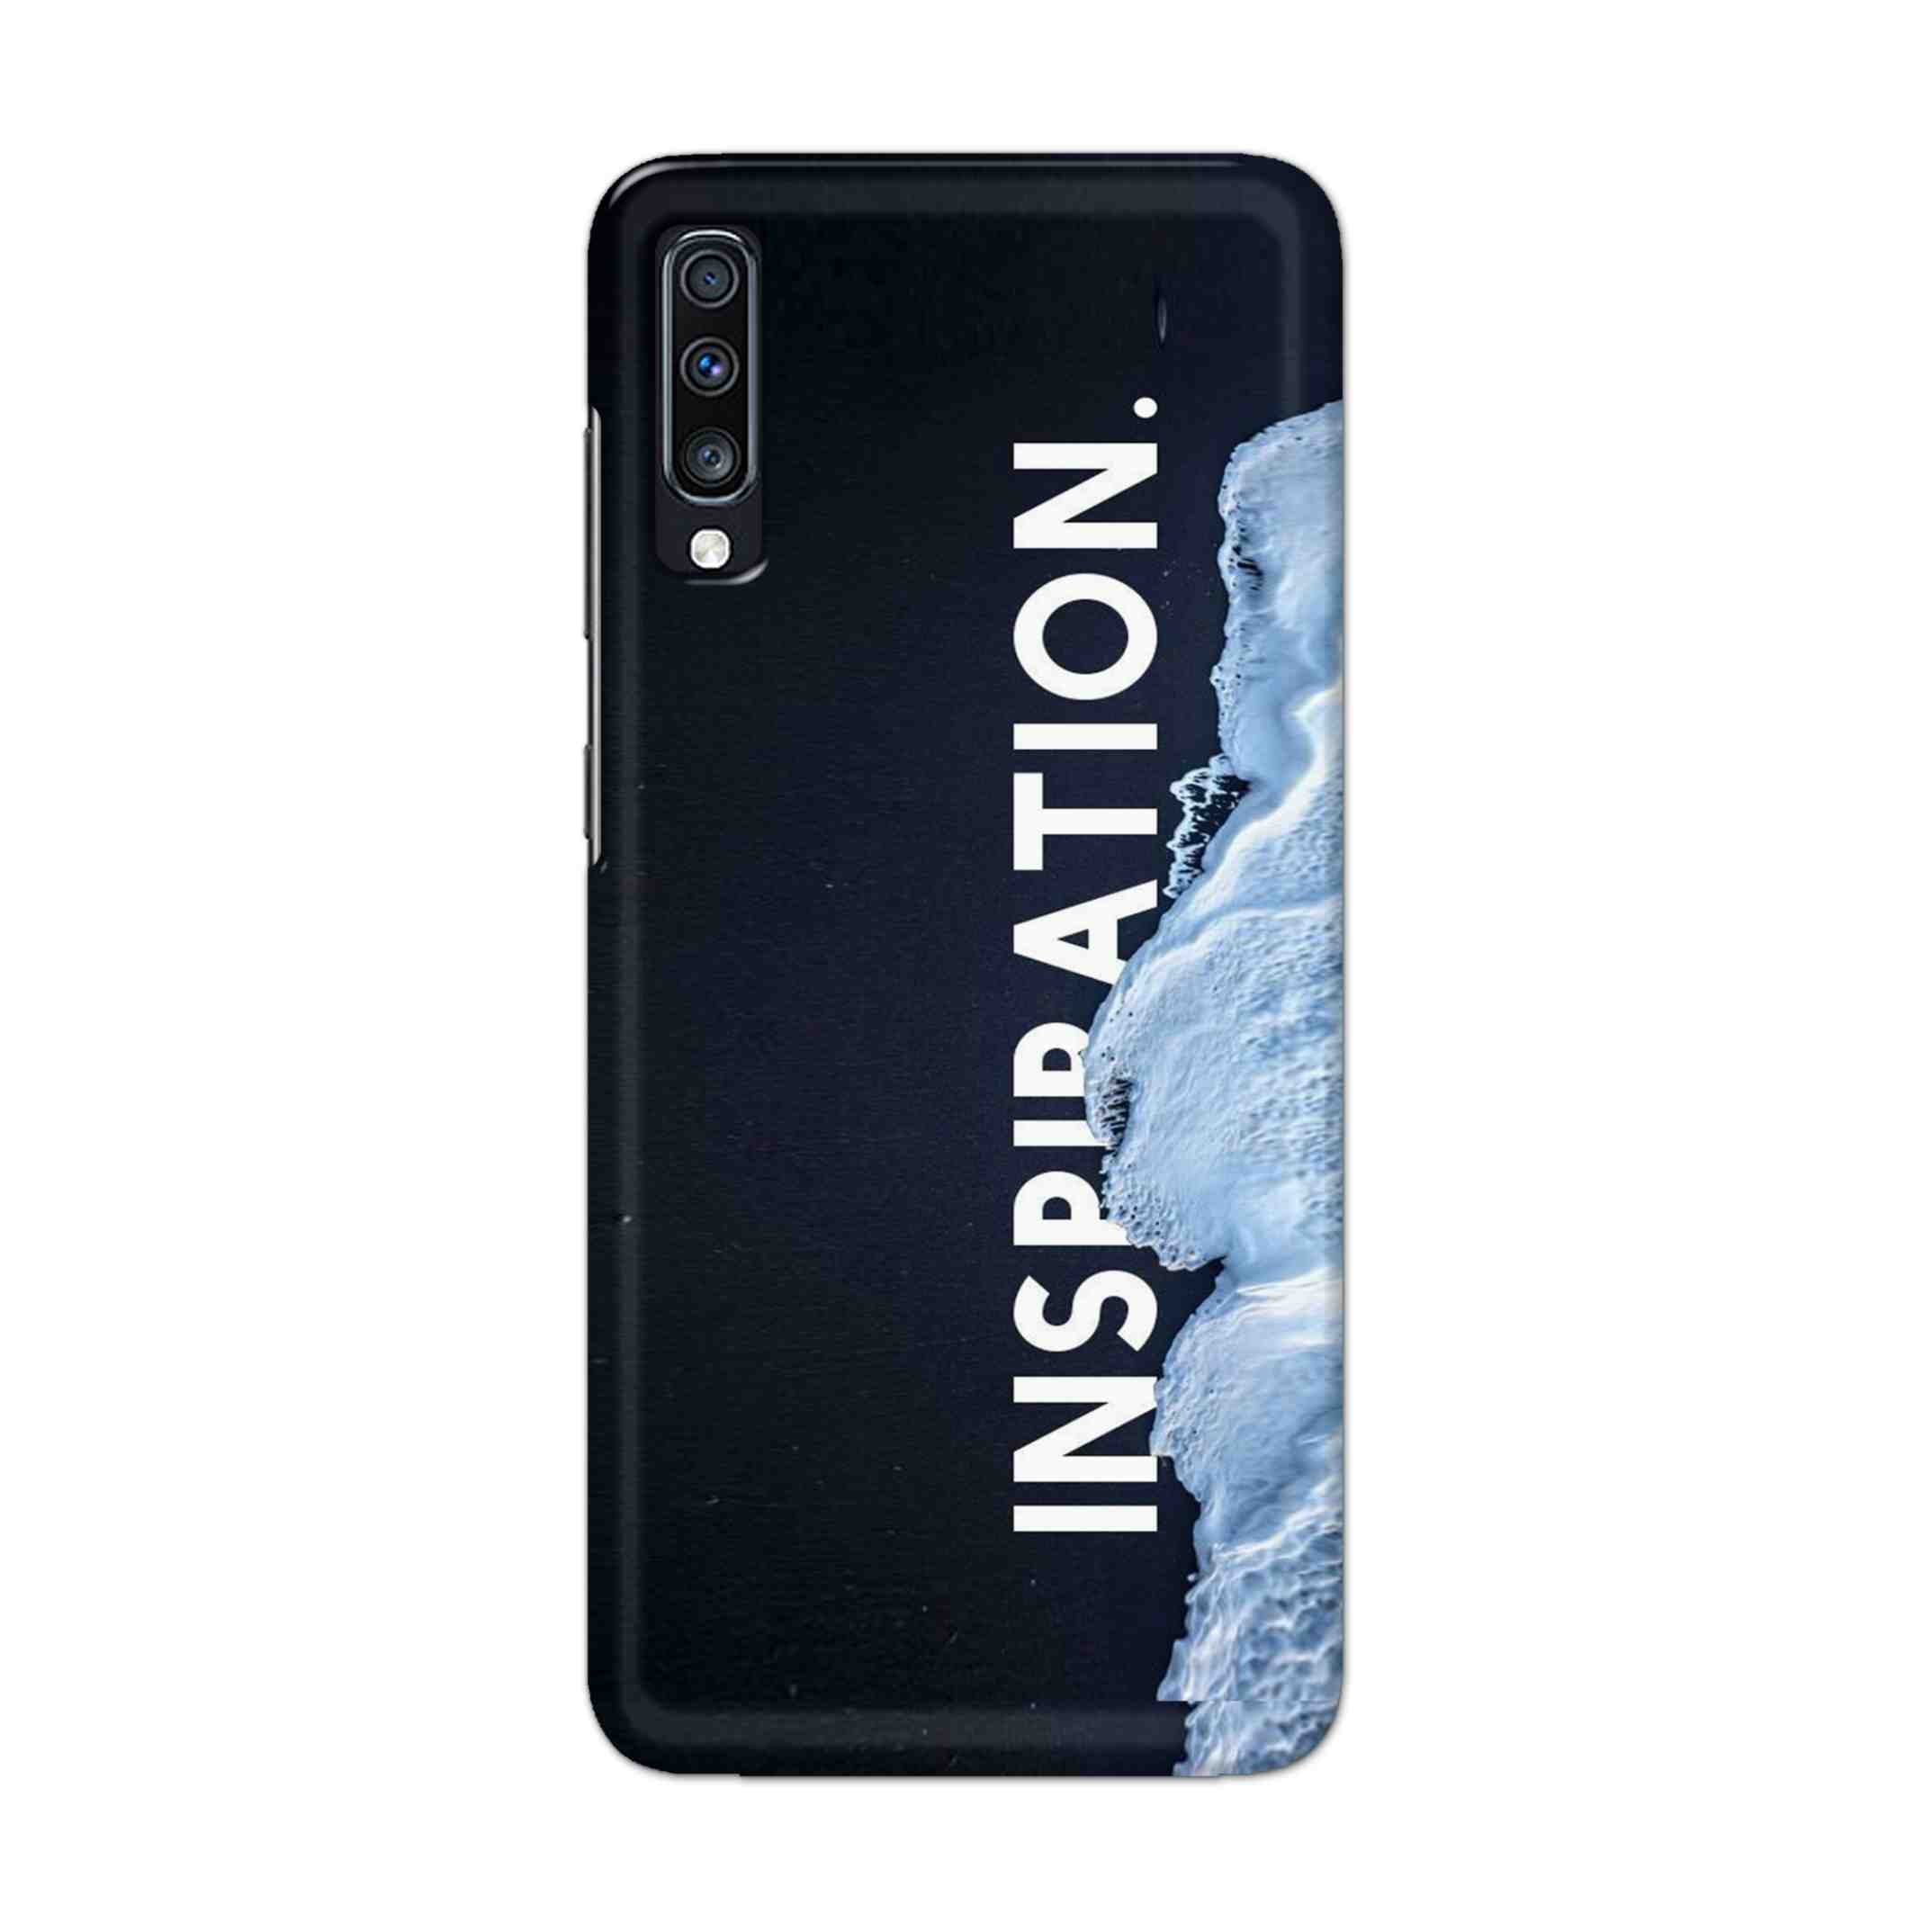 Buy Inspiration Hard Back Mobile Phone Case Cover For Samsung Galaxy A70 Online